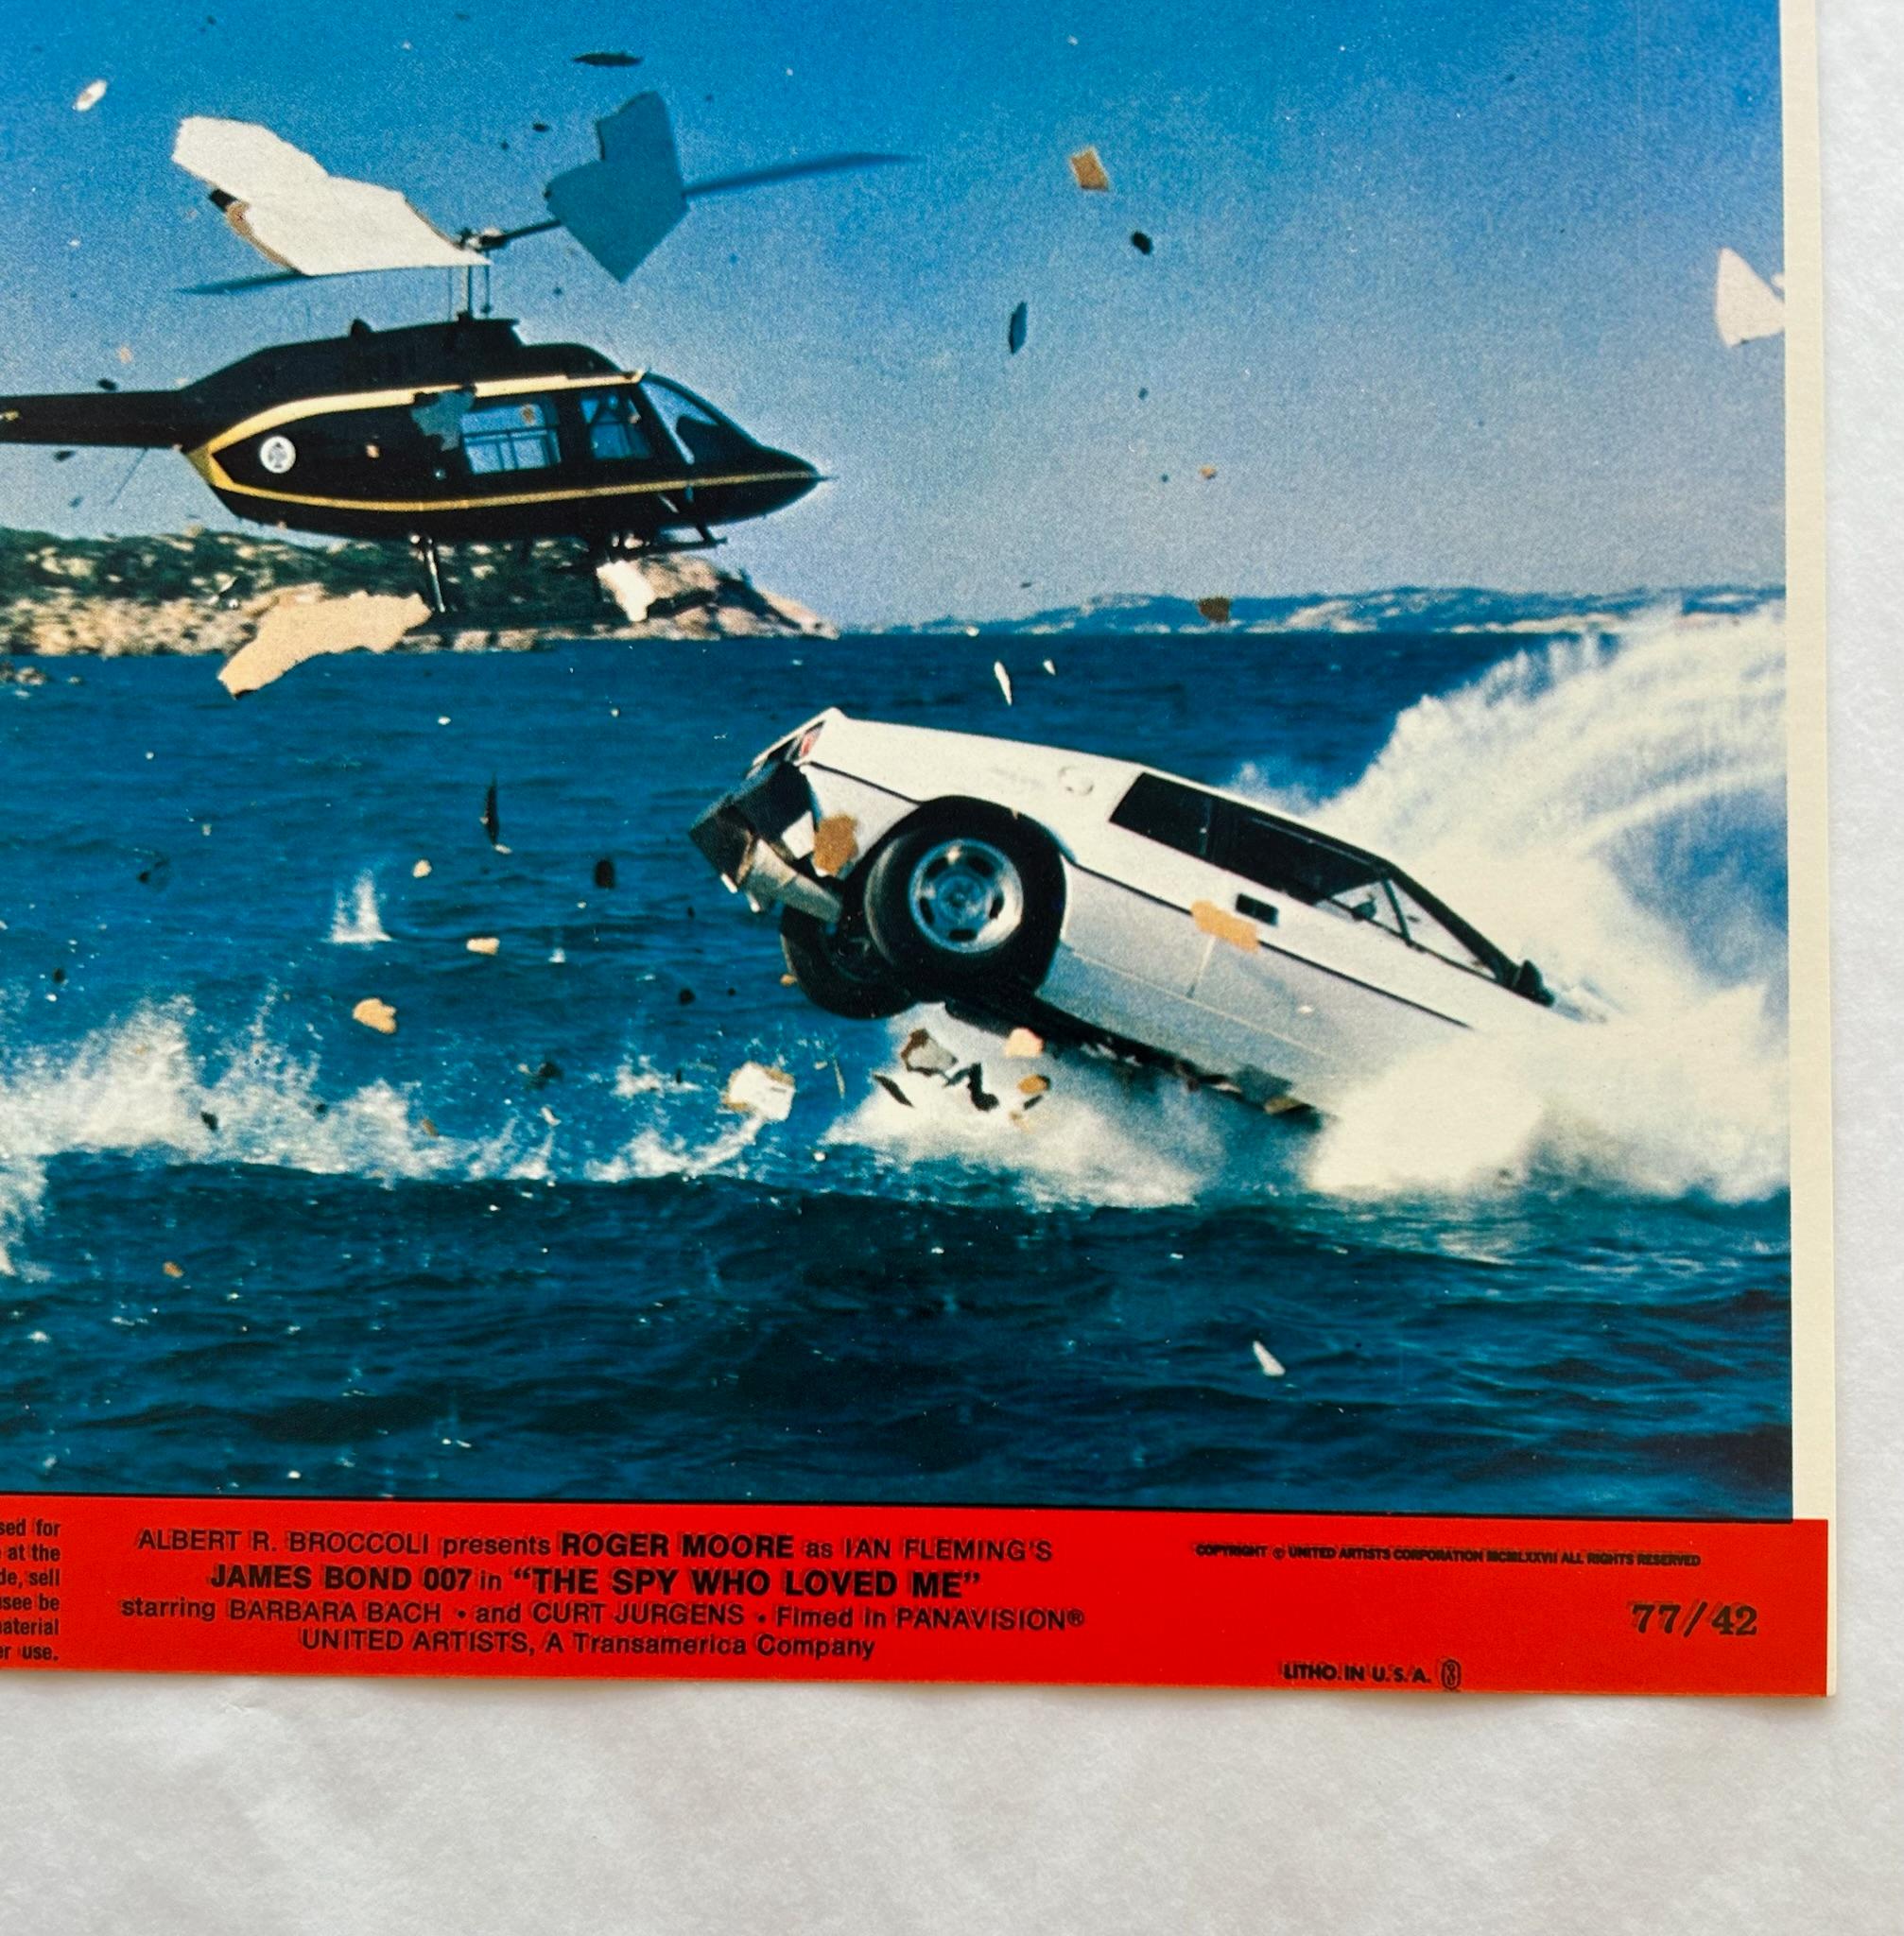 James Bond The Spy Who Loved me - Original 1977 Lobby Card #7

Vintage 1977 The Spy Who Loved Me lobby card of 007's car crashing into the water with a helicopter in pursuit 

Framing options available: Black, brown, white and perspex 

Condition: